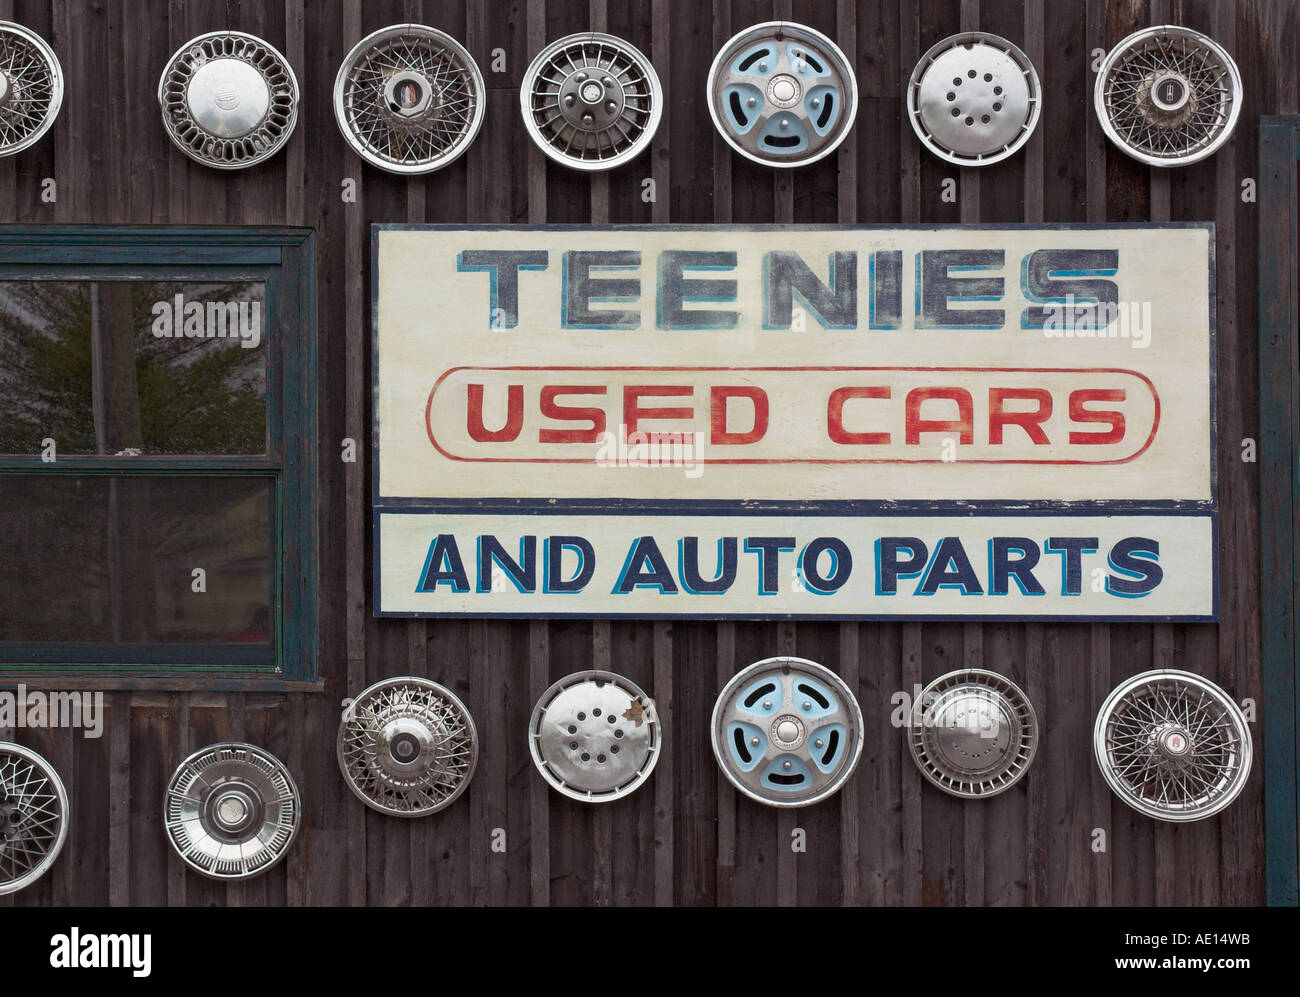 A fifties style car parts shop as part of a film set Stock Photo